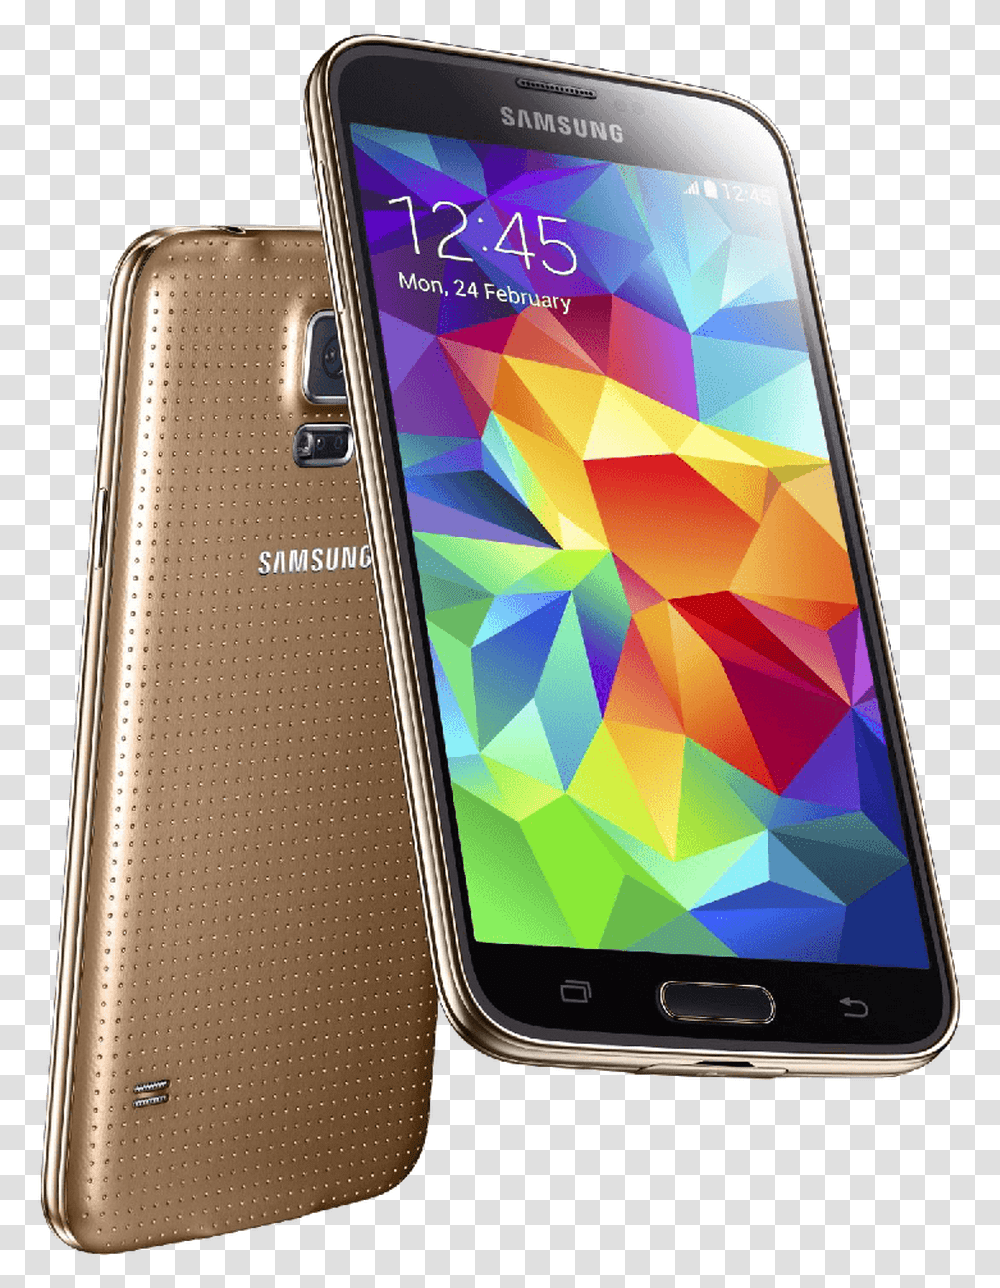 Samsung Galaxy S5 G900h Gold Samsung's 5 Gold, Mobile Phone, Electronics, Cell Phone Transparent Png